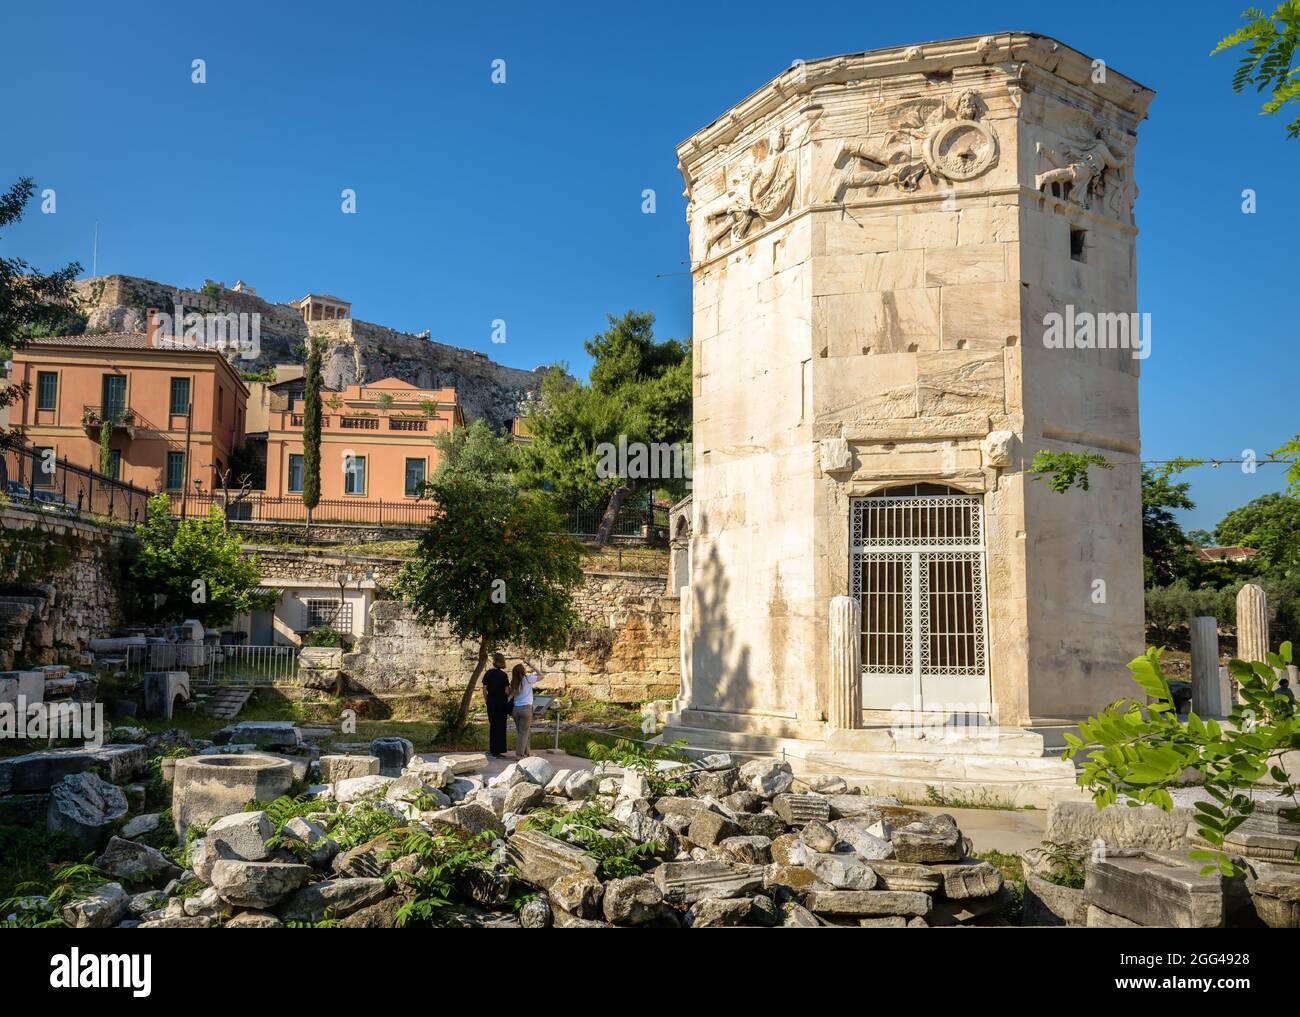 Tower of Winds or Aerides in Roman Agora, Acropolis in distance, Athens, Greece. It is tourist attraction of Athens. View of Ancient Greek ruins in At Stock Photo